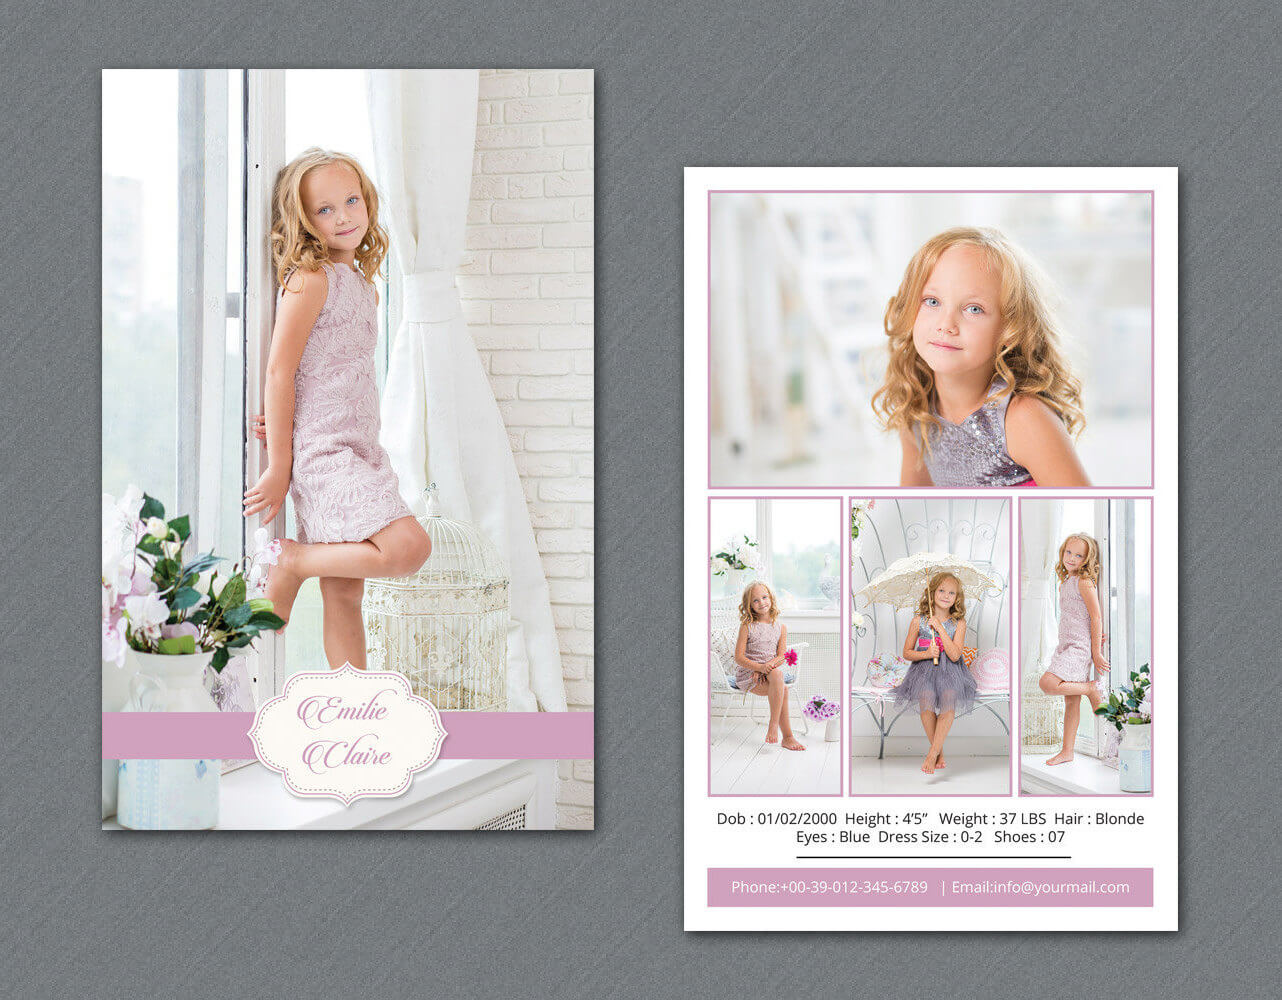 Comp Card Templates ] – On Sale Model Comp Card Photoshop Within Free Zed Card Template